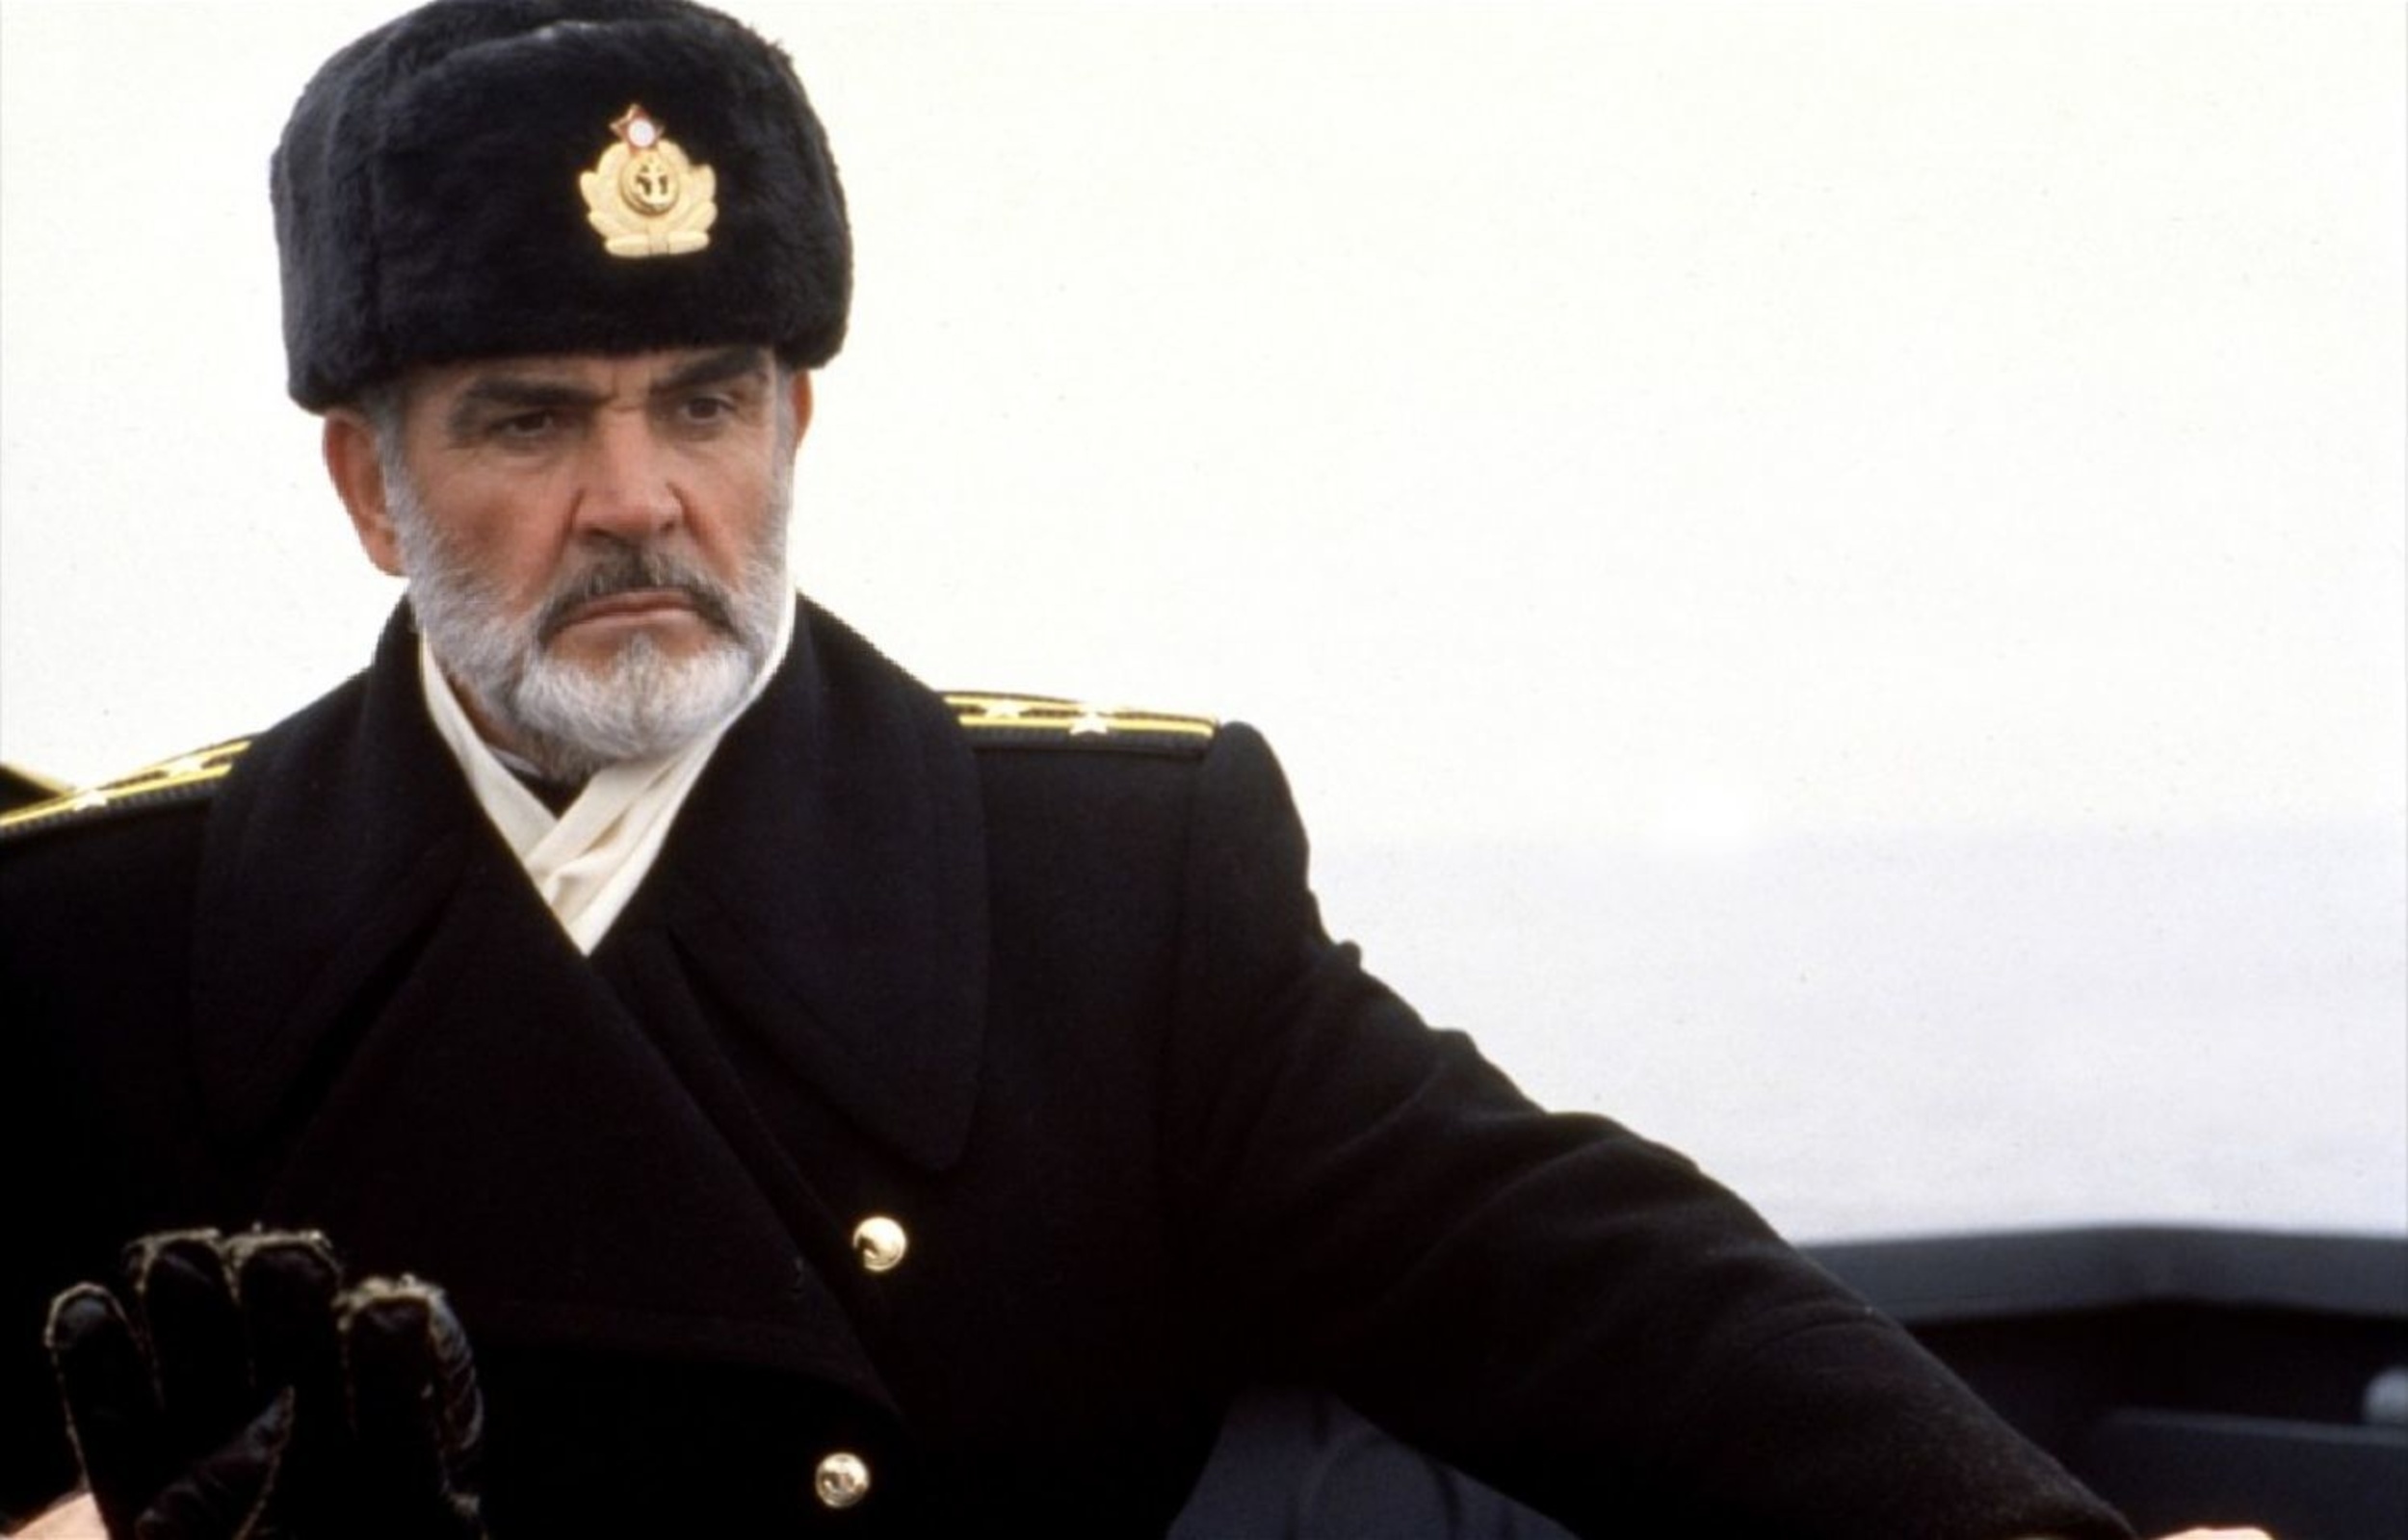 <p>Connery would end up stepping into the role of Ramius, but a miscommunication initially stood in the way. The actor turned the movie down because he didn’t understand why the Soviet Union was being treated like an emerging naval power in the movie. It turned out he was missing the script's first page, which set the story in 1984.</p><p>You may also like: <a href='https://www.yardbarker.com/entertainment/articles/the_greatest_singing_voices_of_all_time_031524/s1__39115167'>The greatest singing voices of all time</a></p>